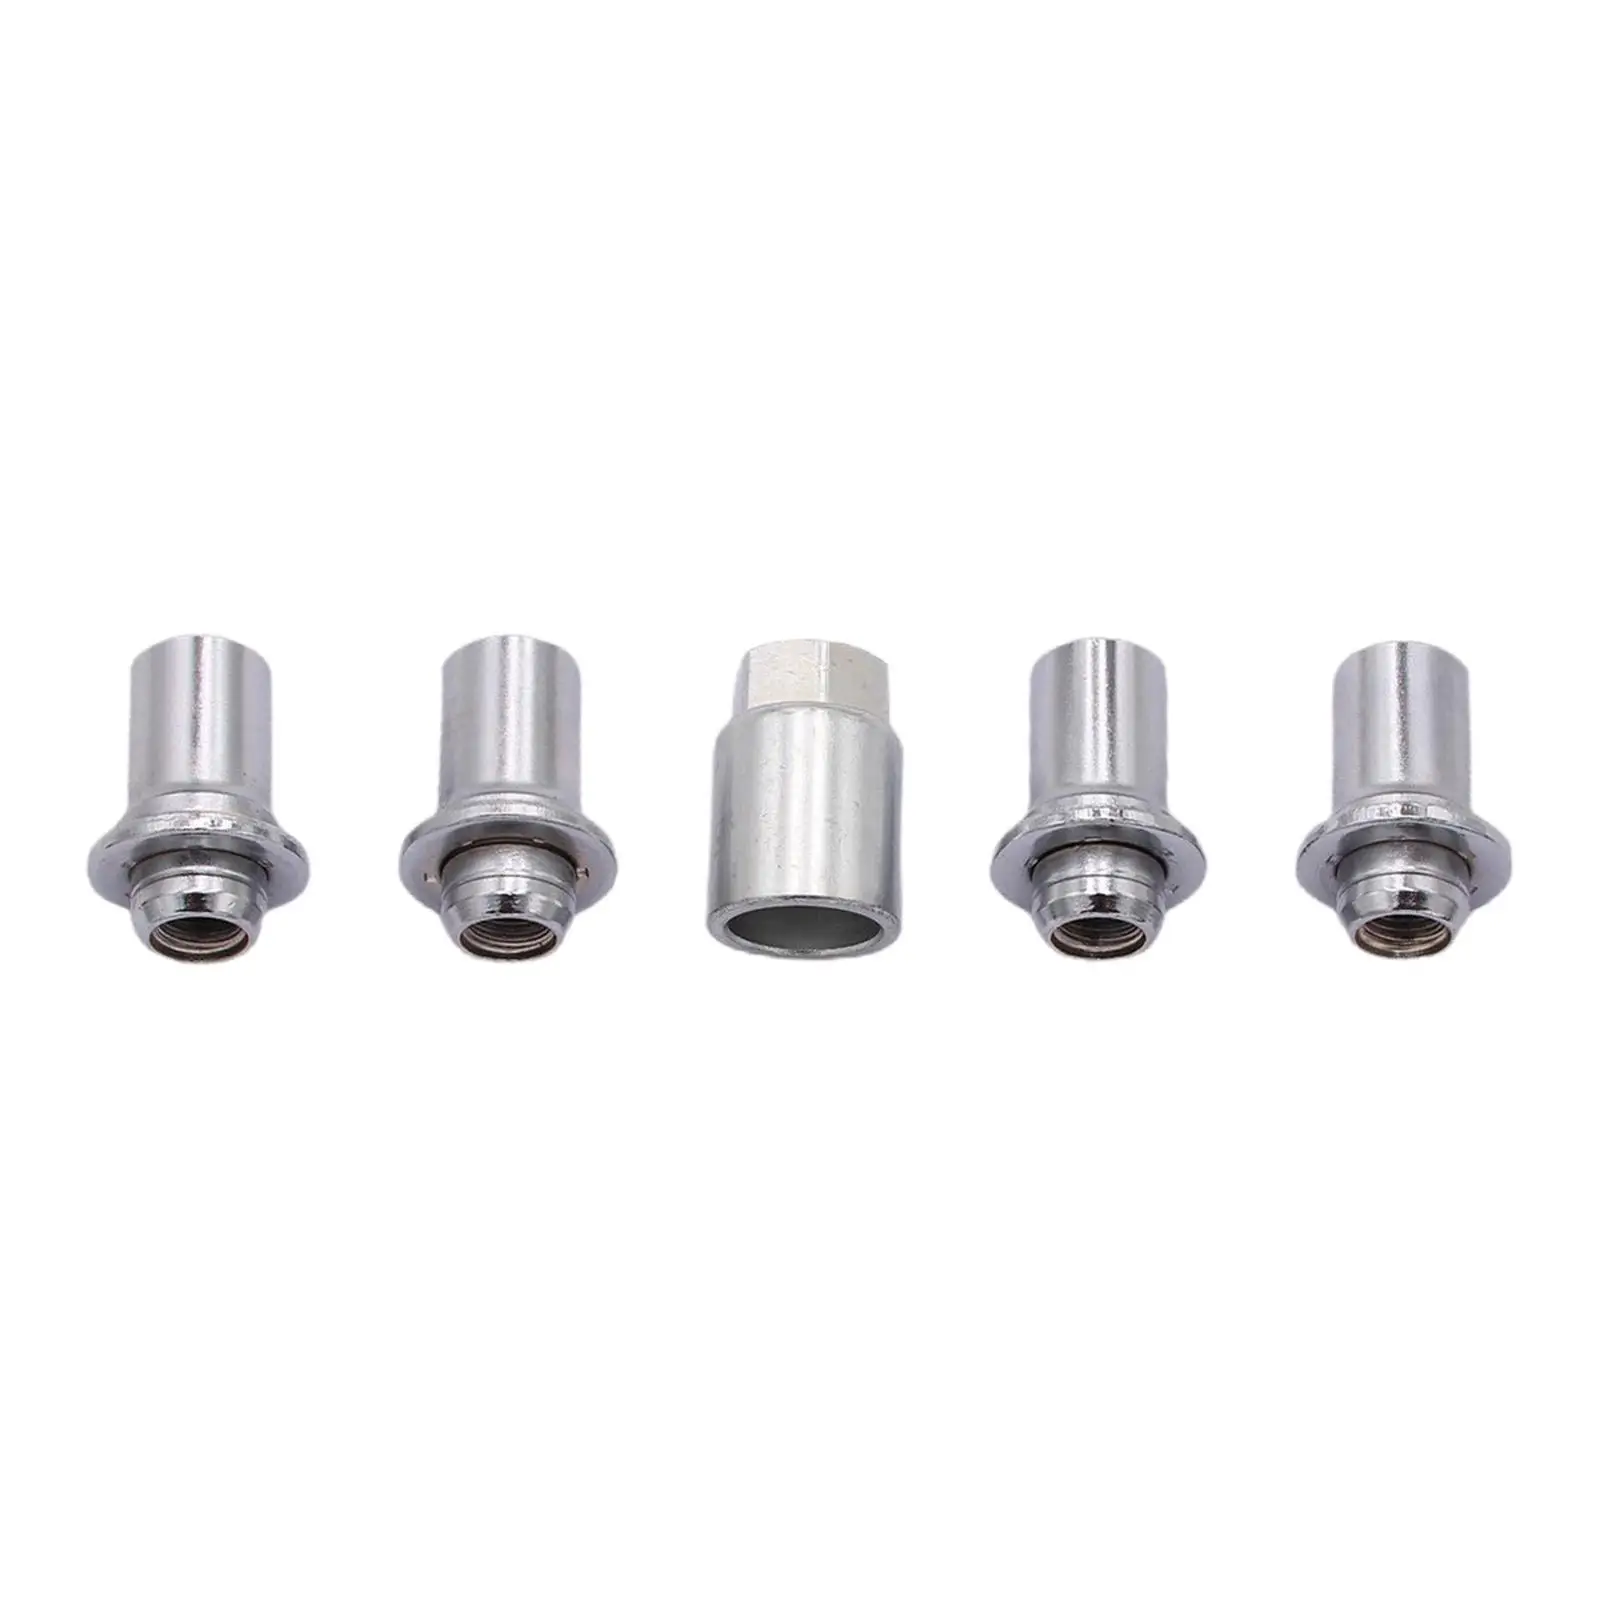 Metal Wheel Lock Set 00276-00901 Accessory Replaces Professional Assembly Wheel Lock Lug Nut Set Durable for 4Runner